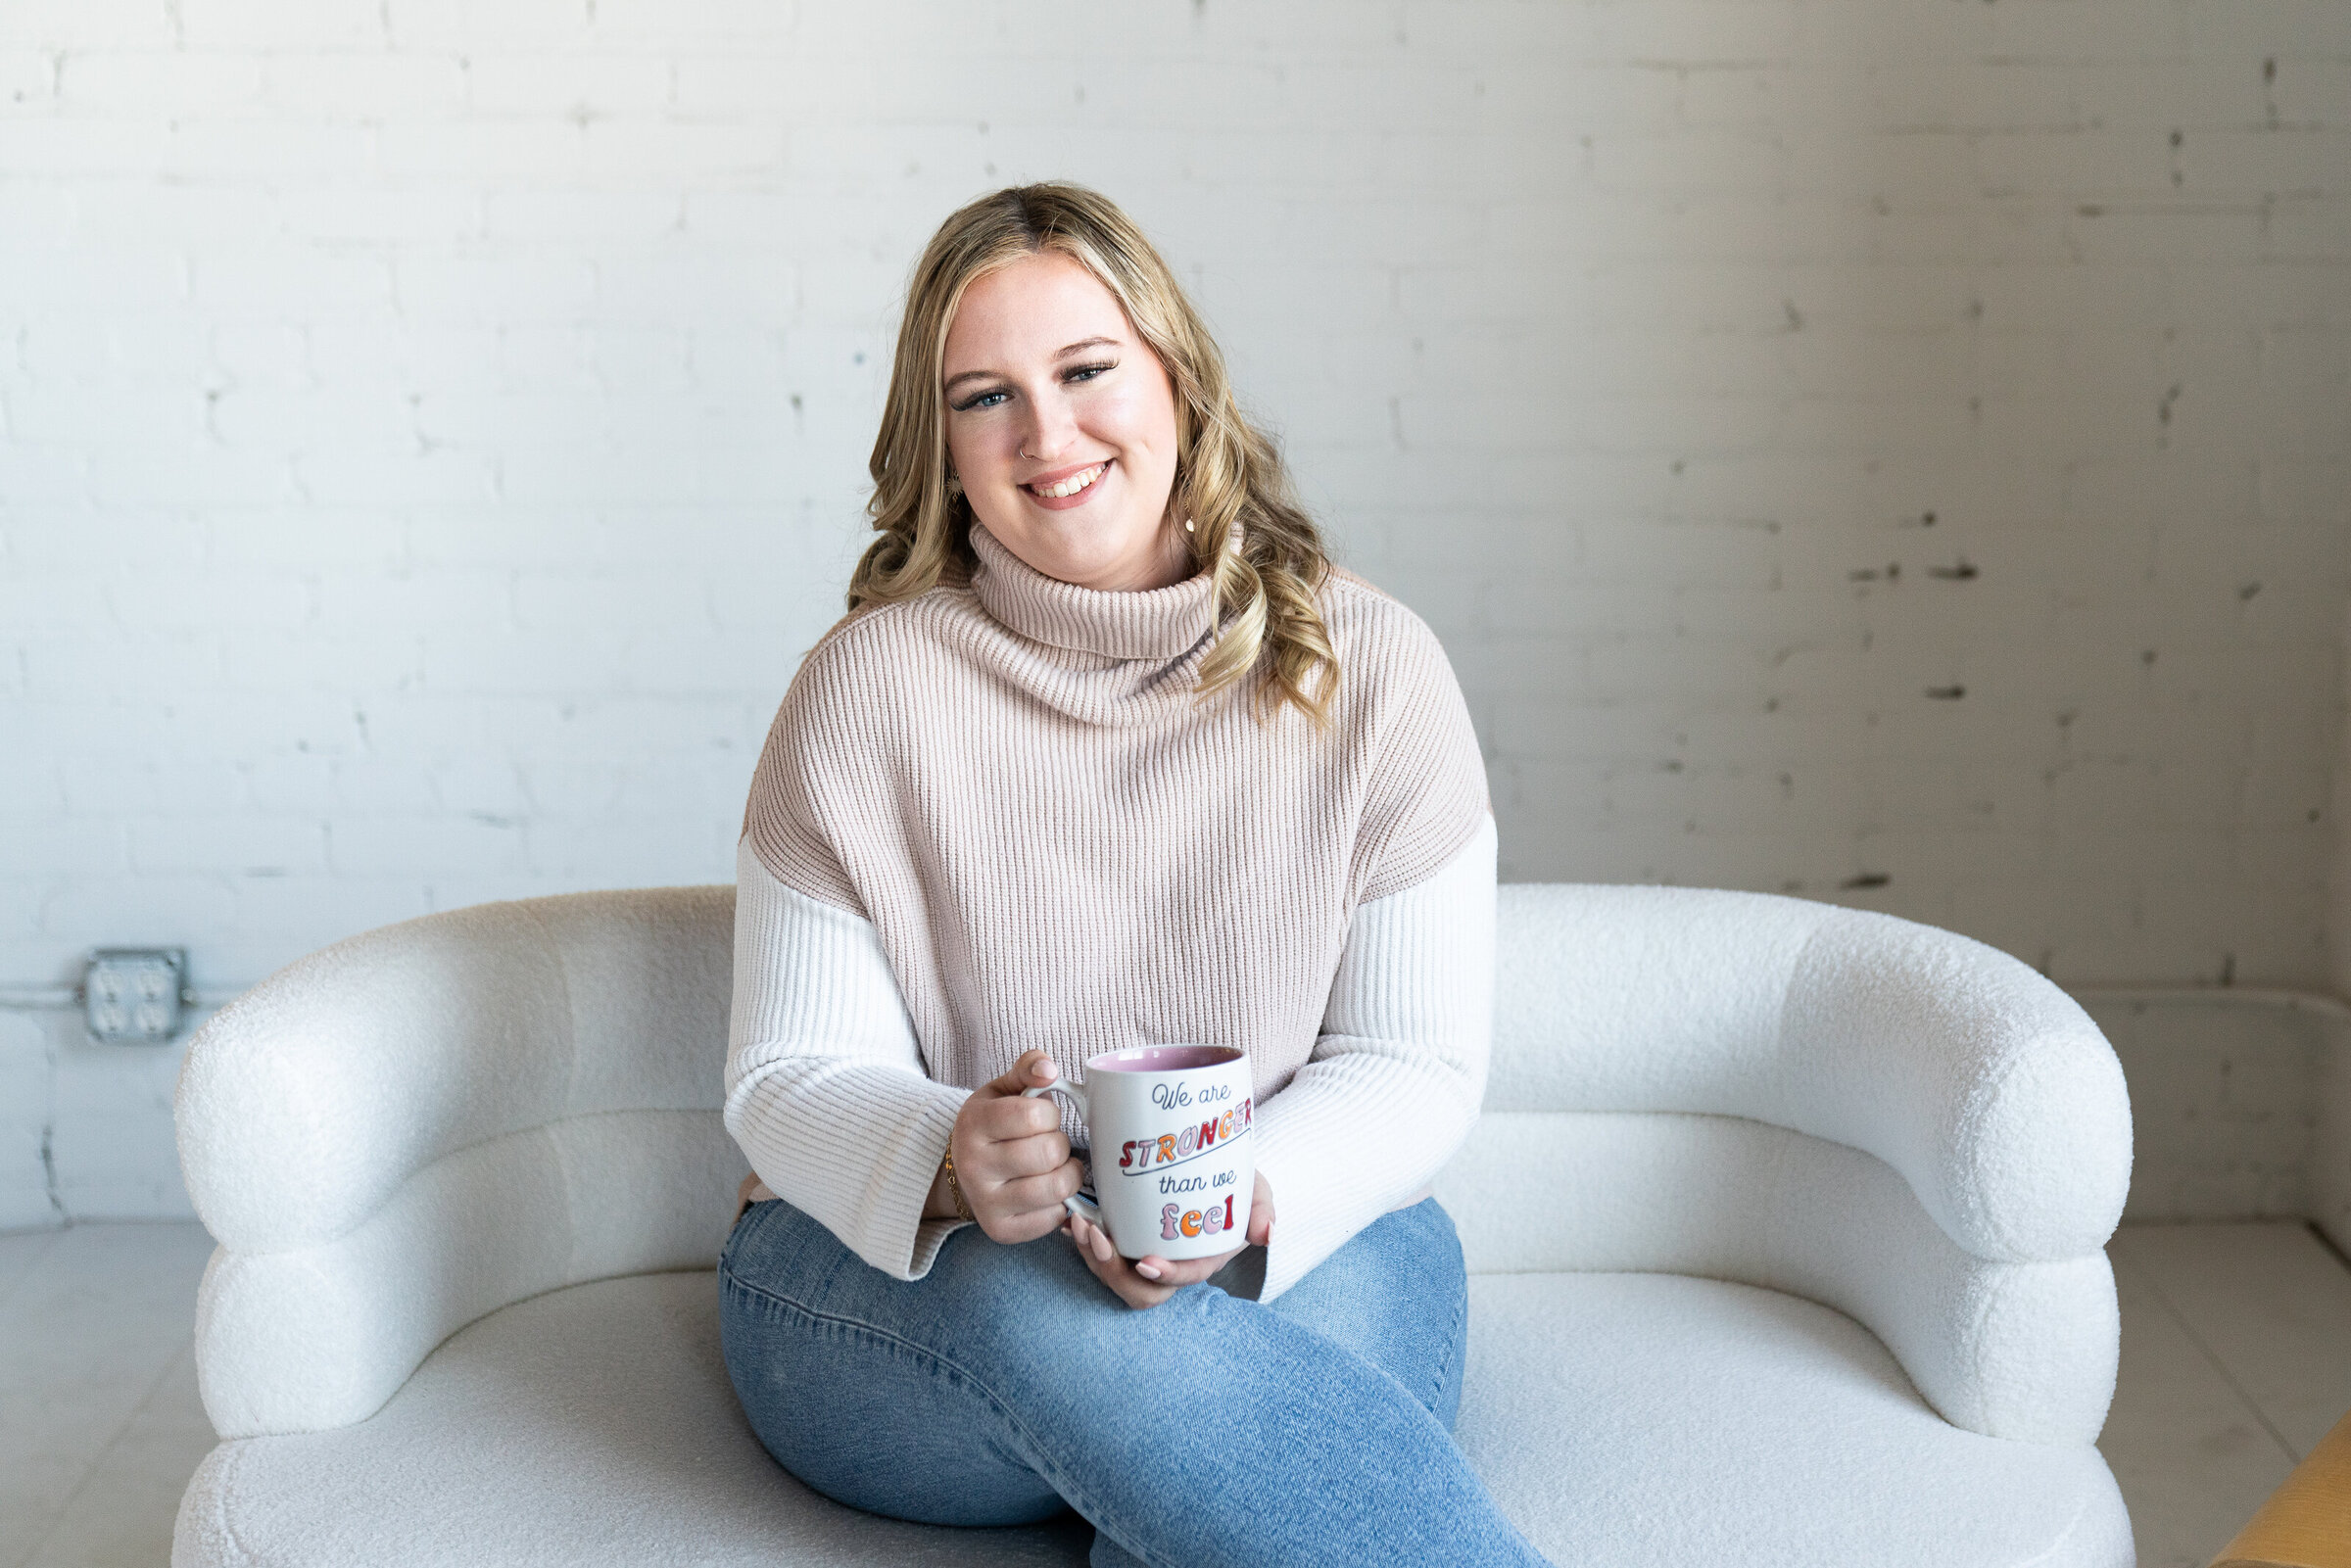 Woman sitting on a couch holding a coffee mug for her professional headshot photo shoot.